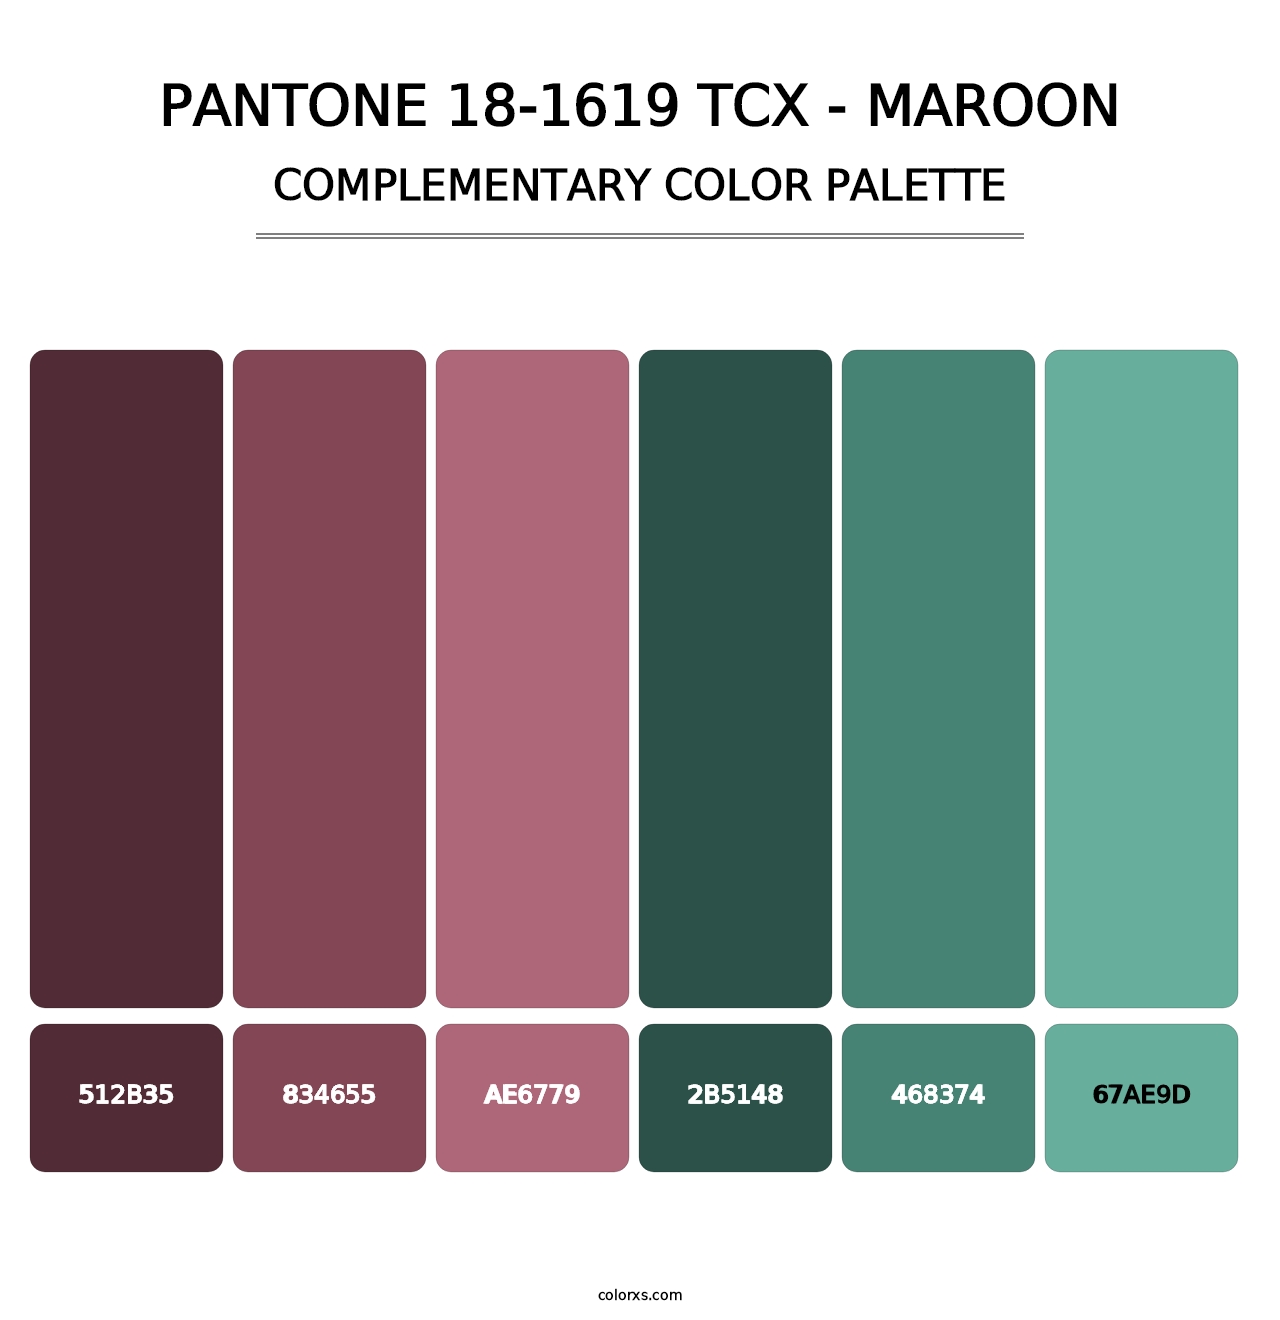 PANTONE 18-1619 TCX - Maroon - Complementary Color Palette